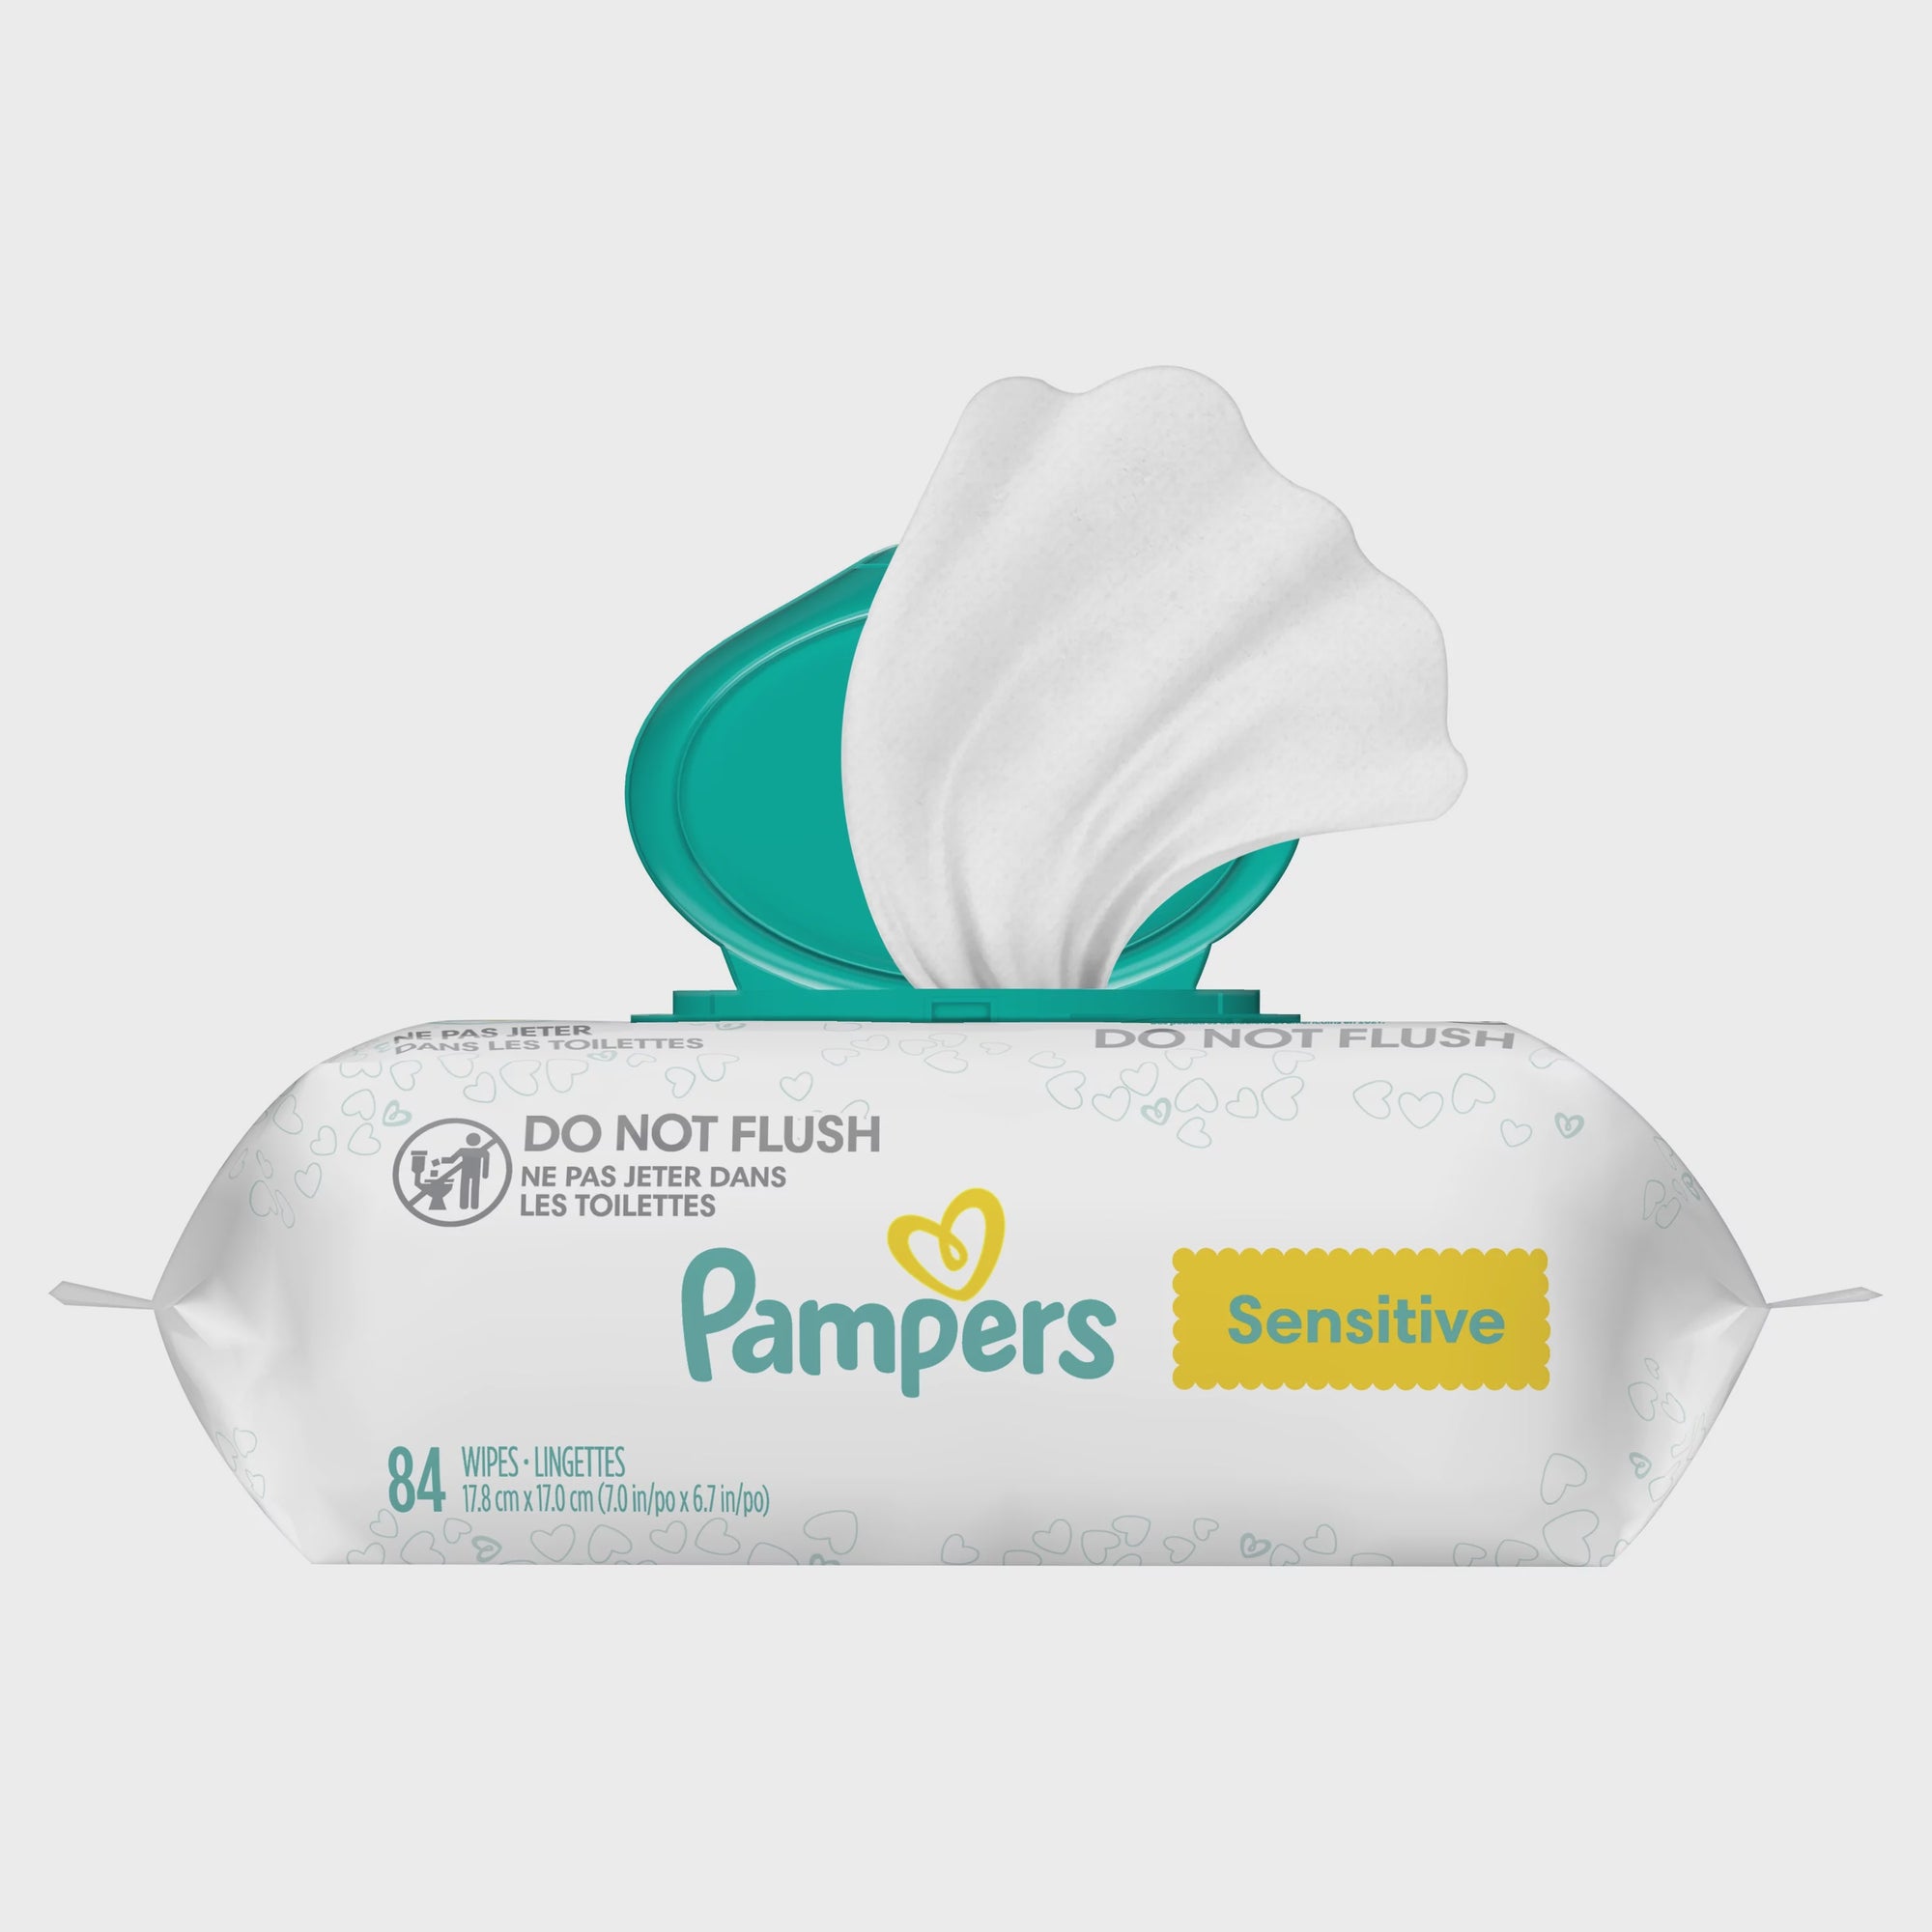 Pampers Sensitive Wipes Single Pack 84 count